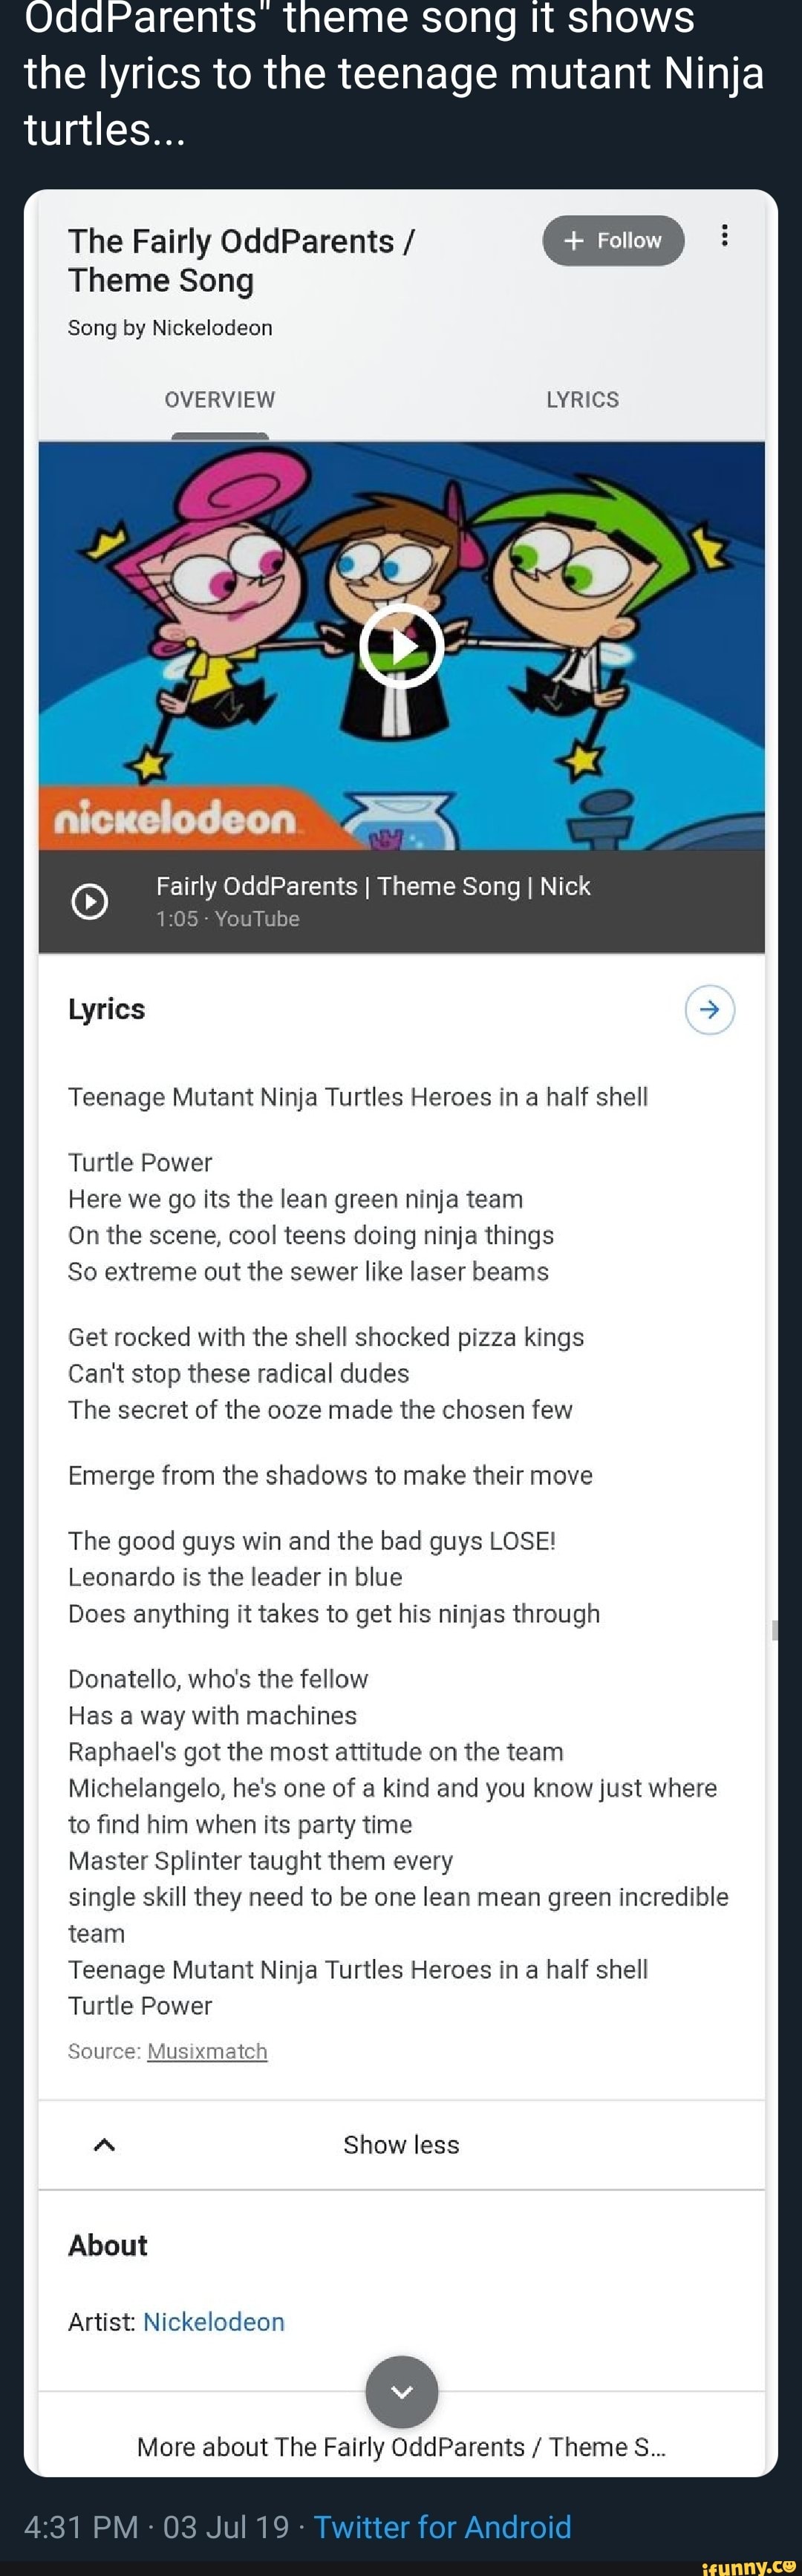 When you google the Fairly OddParents theme song lyrics it tells you the  Teenage Mutant Ninja Turtles theme song : r/mildlyinfuriating